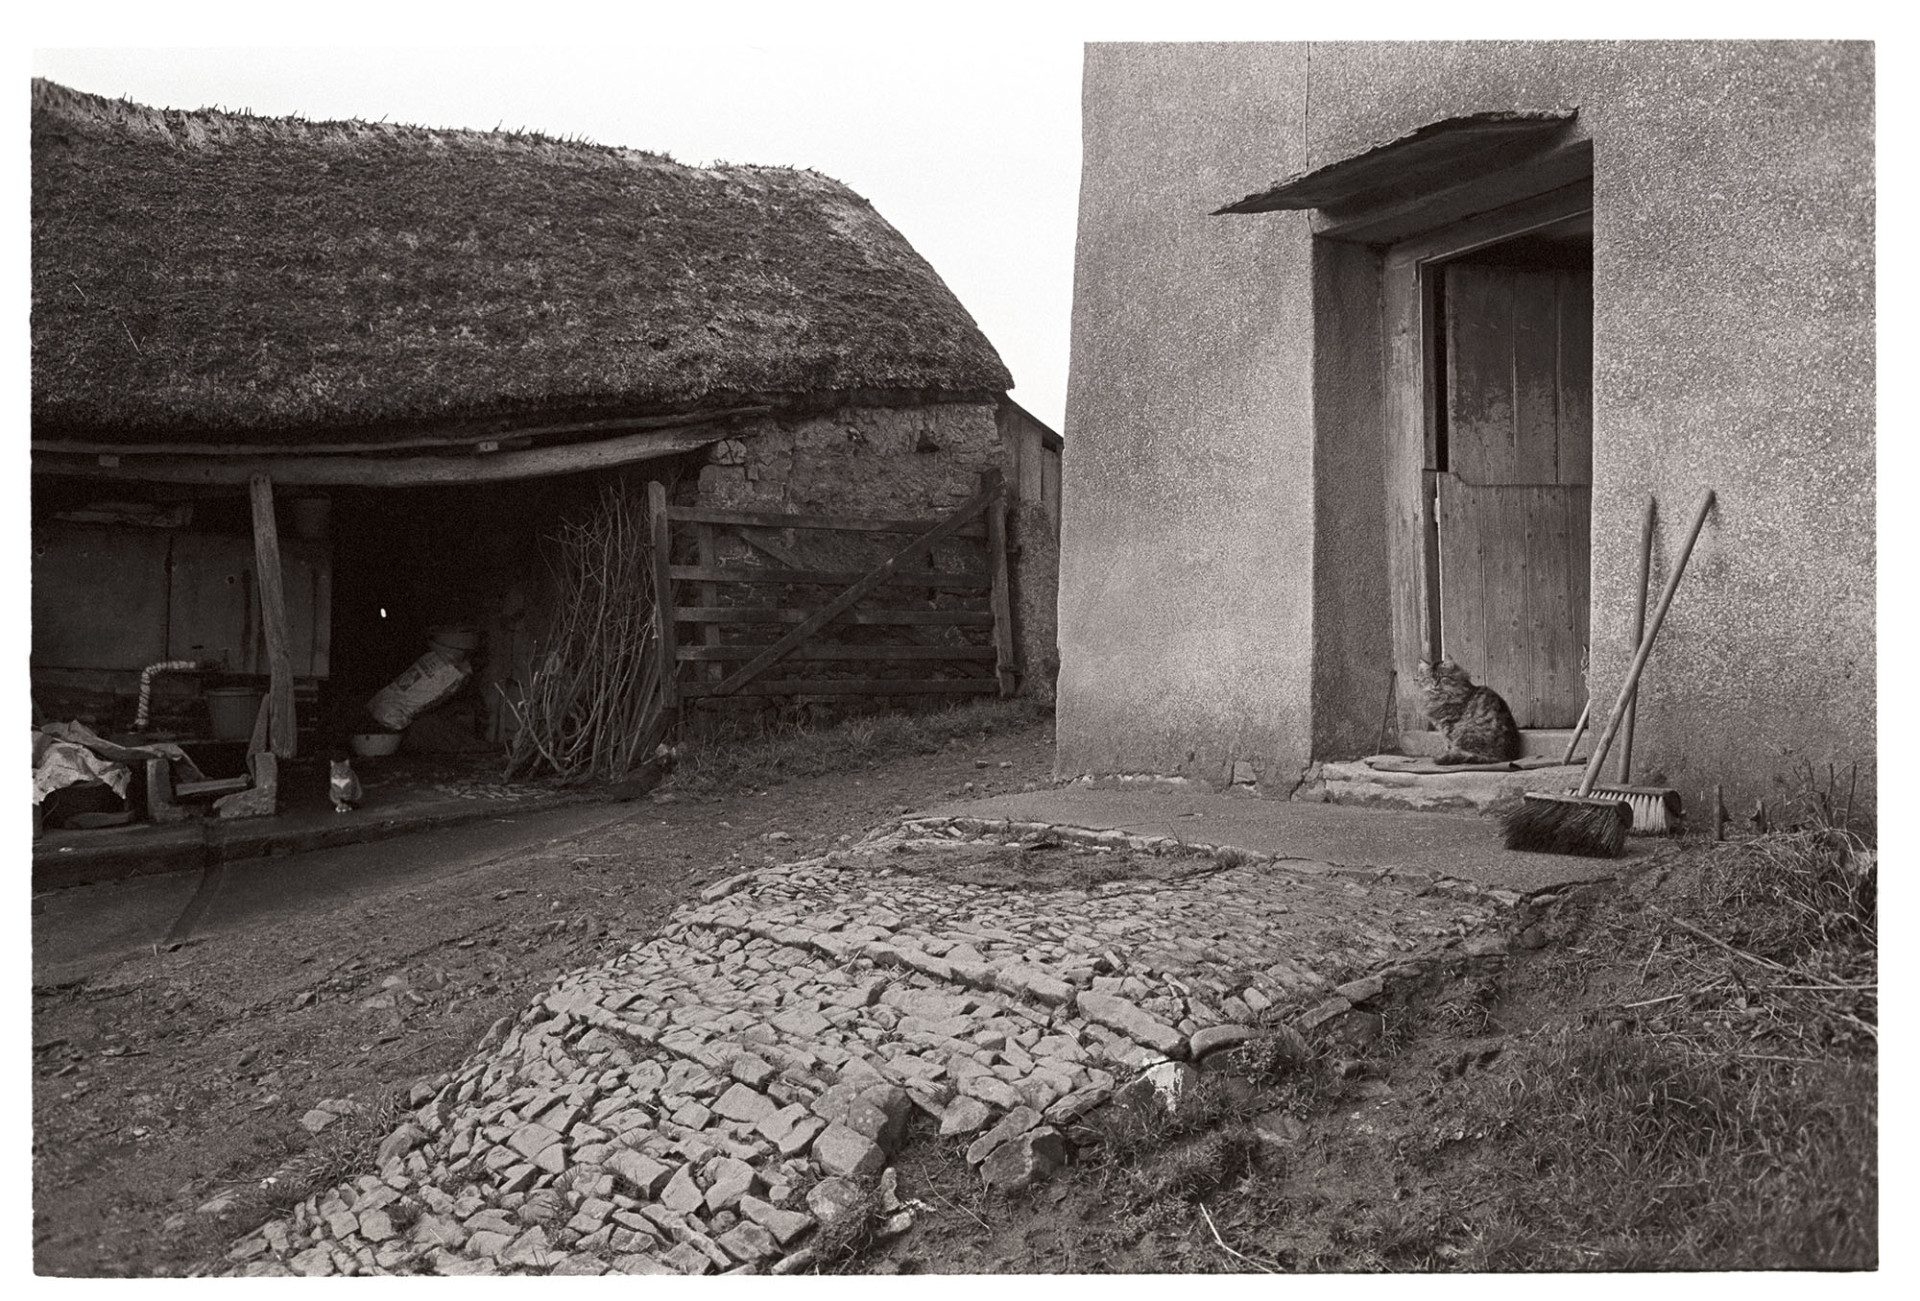 Farmhouse door, cobbled path and thatched barn, cat.
[A cobbled path leading to the farmhouse door with a cat sitting on the doorstep beside brooms, at Bridge Town, Iddesleigh.  Another cat sits in a thatched barn is in the background, which might formerly have been a dwelling.]